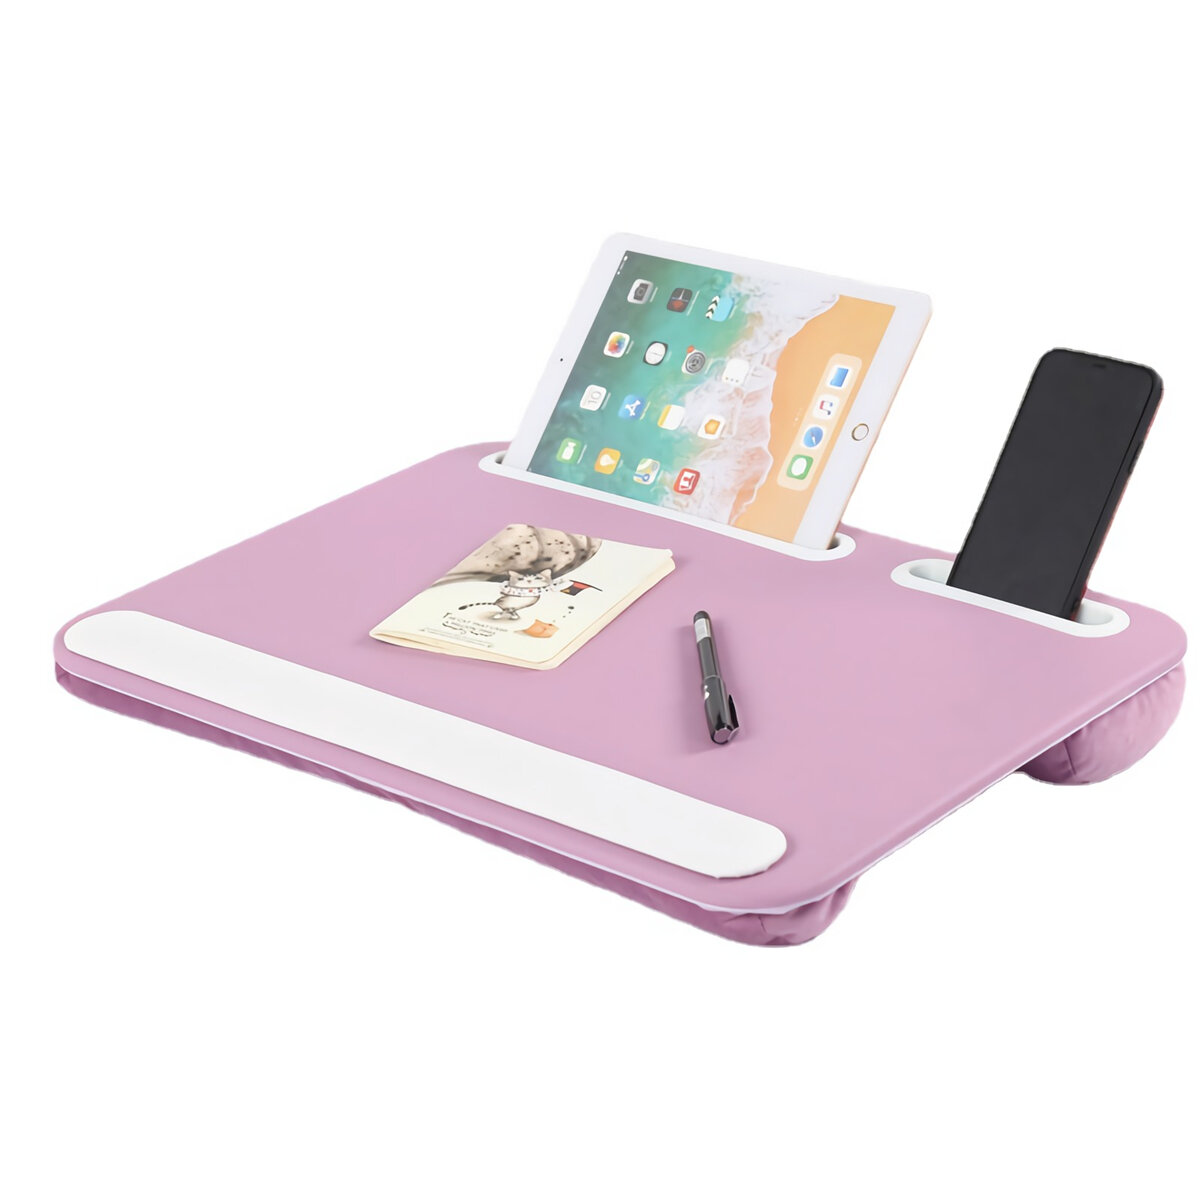 Image of 2-in-1 Double Slot Lap Desk Study Pillow Table Computer Laptop Desk Portable Laptop Stand with Phone/Tablet Holder